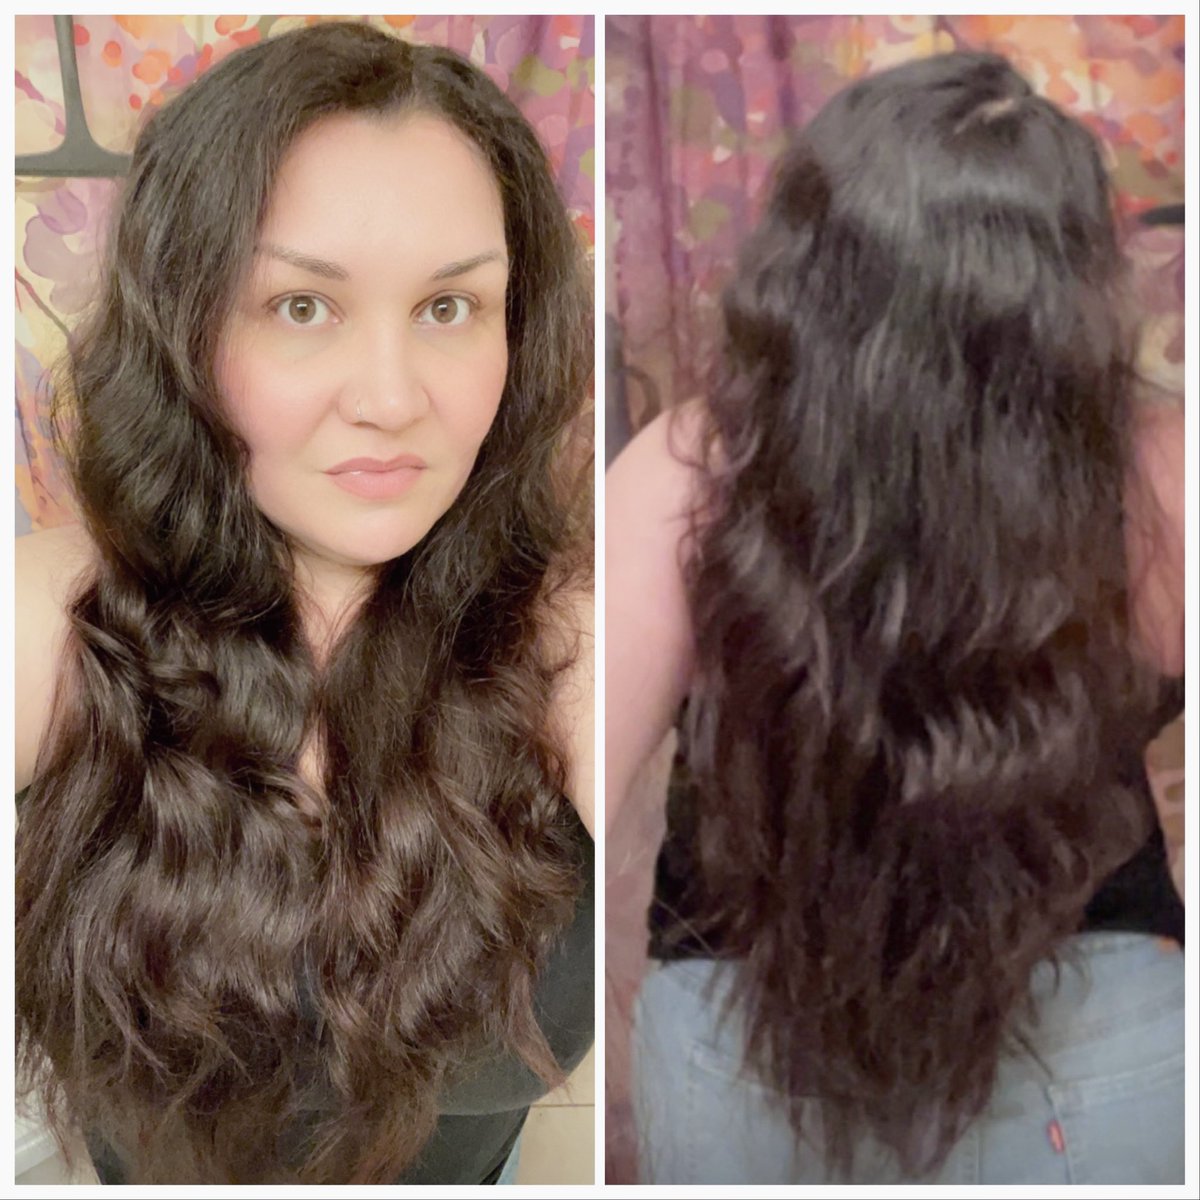 Tried an all-natural hair conditioner: apple cider vinegar! Works great! #ChemicalFreeHairCare #NaturalHairCare #ButtLengthHair #HennaHair #LongLongHair #LongWavyLayers